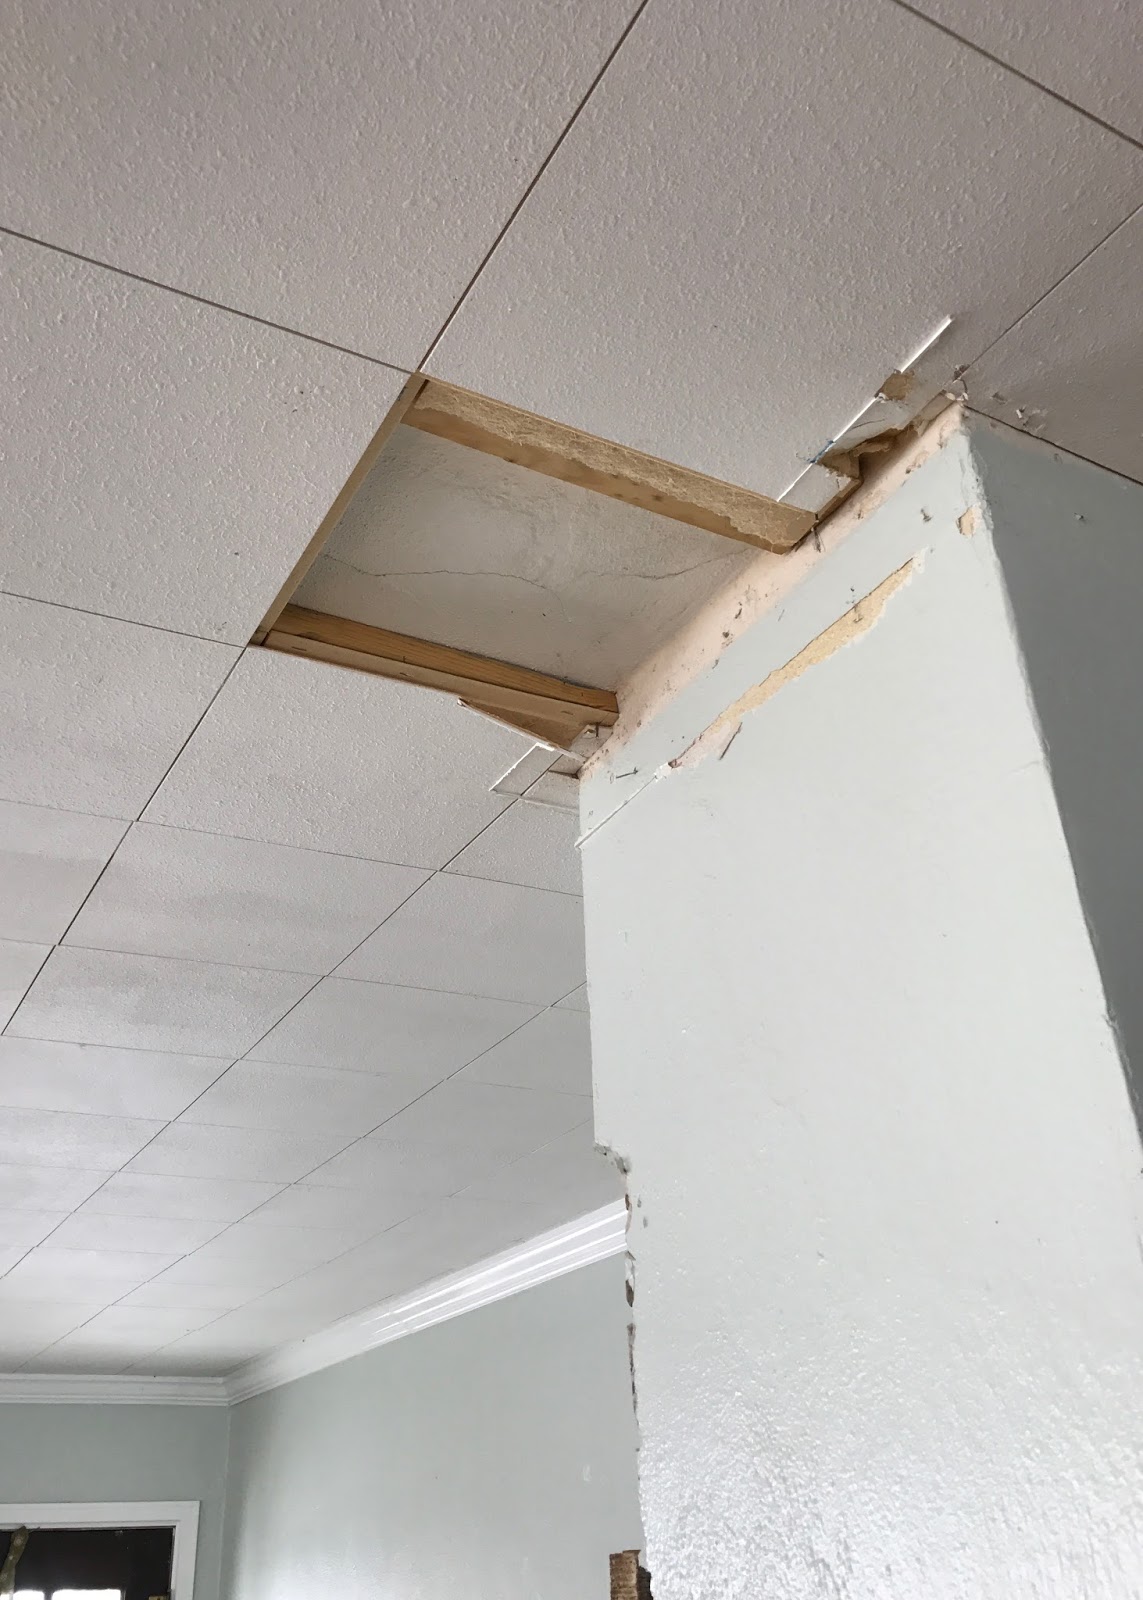 Farmhouse Ceiling Removing Tiles, How To Replace A 12×12 Ceiling Tile